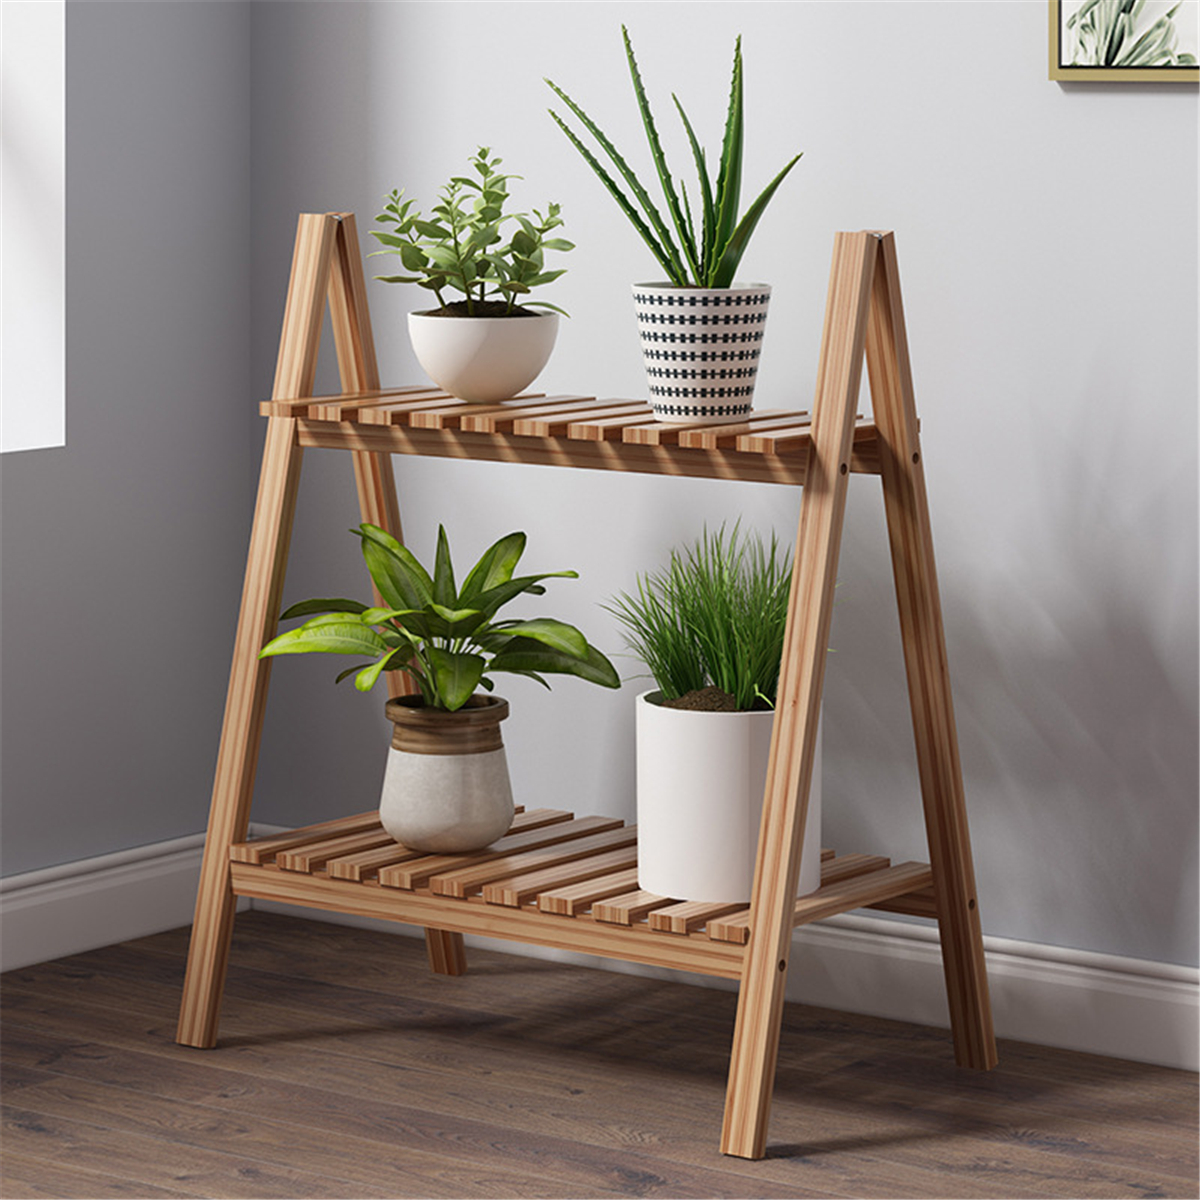 2-Layers-Flower-Racks-Foldable-Wood-Plant-Stand-A-shape-Indoor-Landing-Shelf-for-Home-Balcony-1766531-4